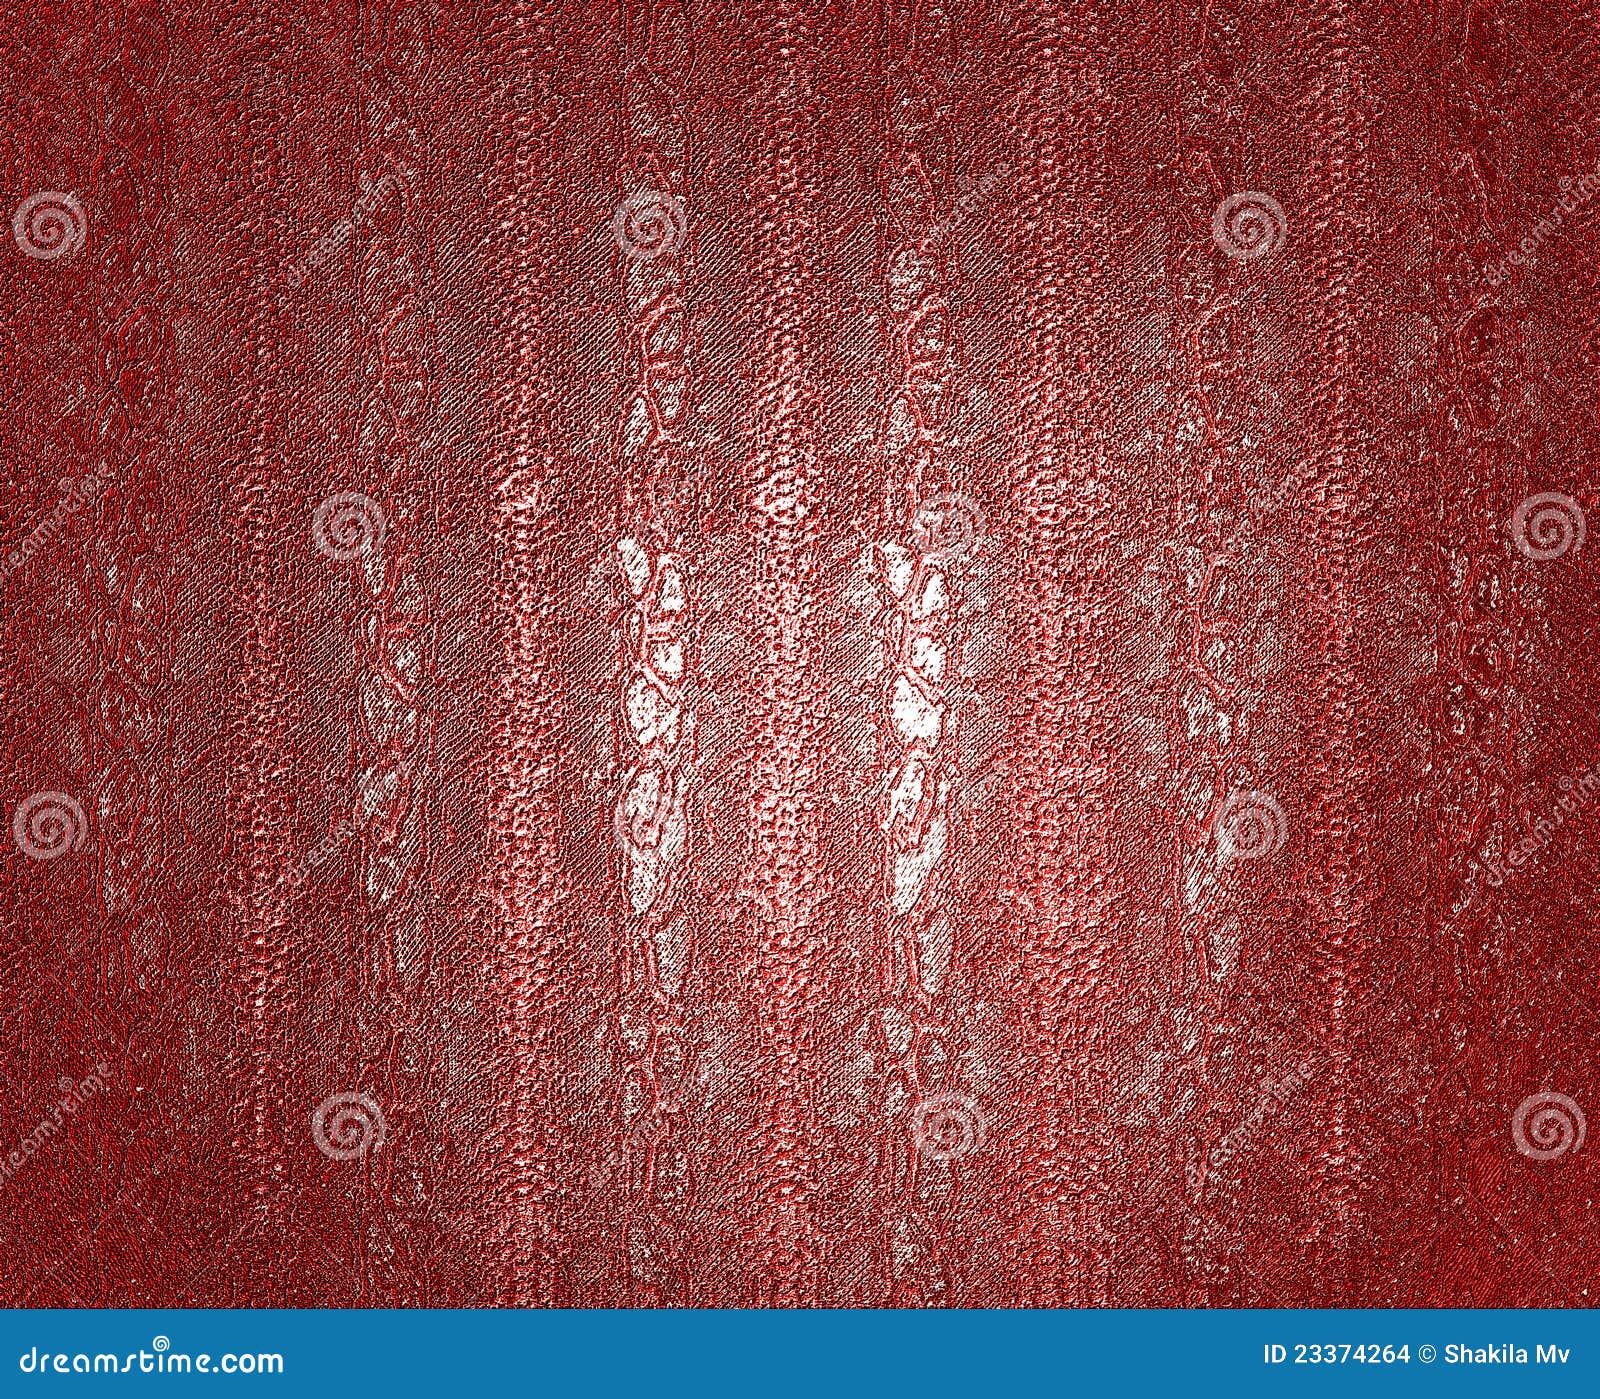 Red Leather Background stock photo. Image of color, background - 23374264